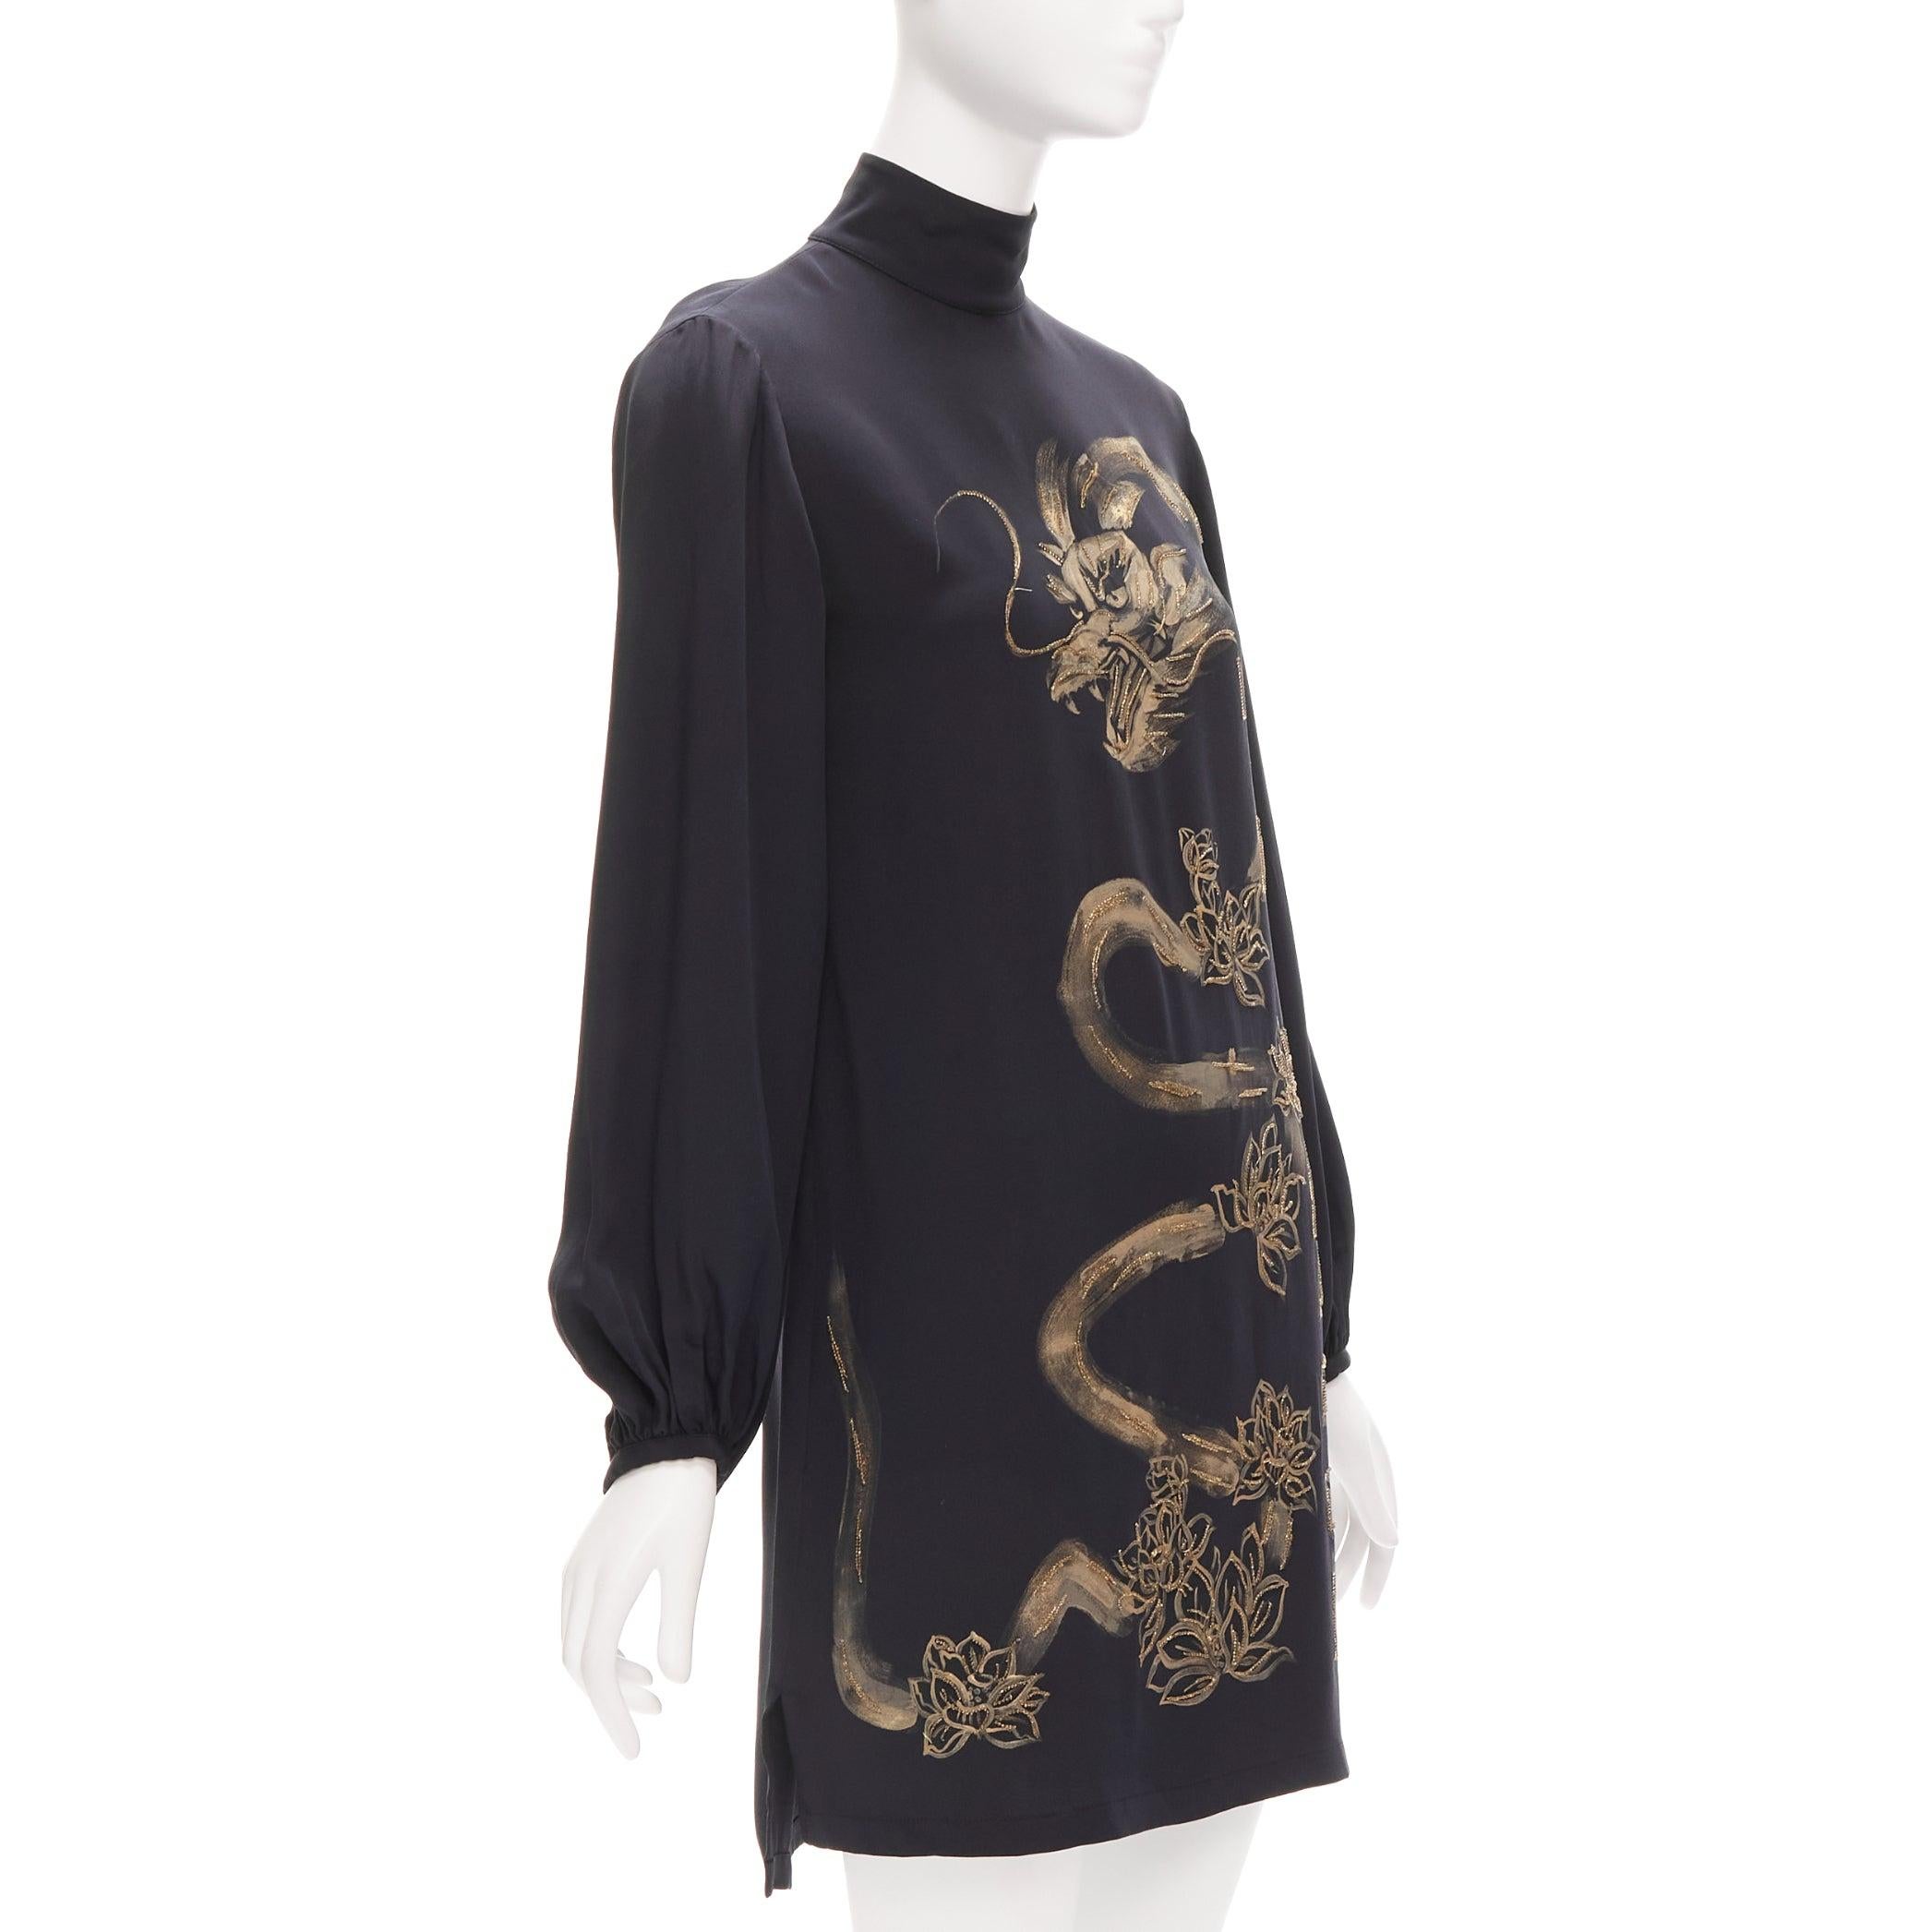 EMILIO PUCCI 2013 Runway gold beaded oriental Dragon black silk dress IT40 S
Reference: TGAS/D00944
Brand: Emilio Pucci
Collection: SS 2013 - Runway
Material: Silk
Color: Black, Gold
Pattern: Ethnic
Closure: Keyhole Button
Extra Details: Keyhole